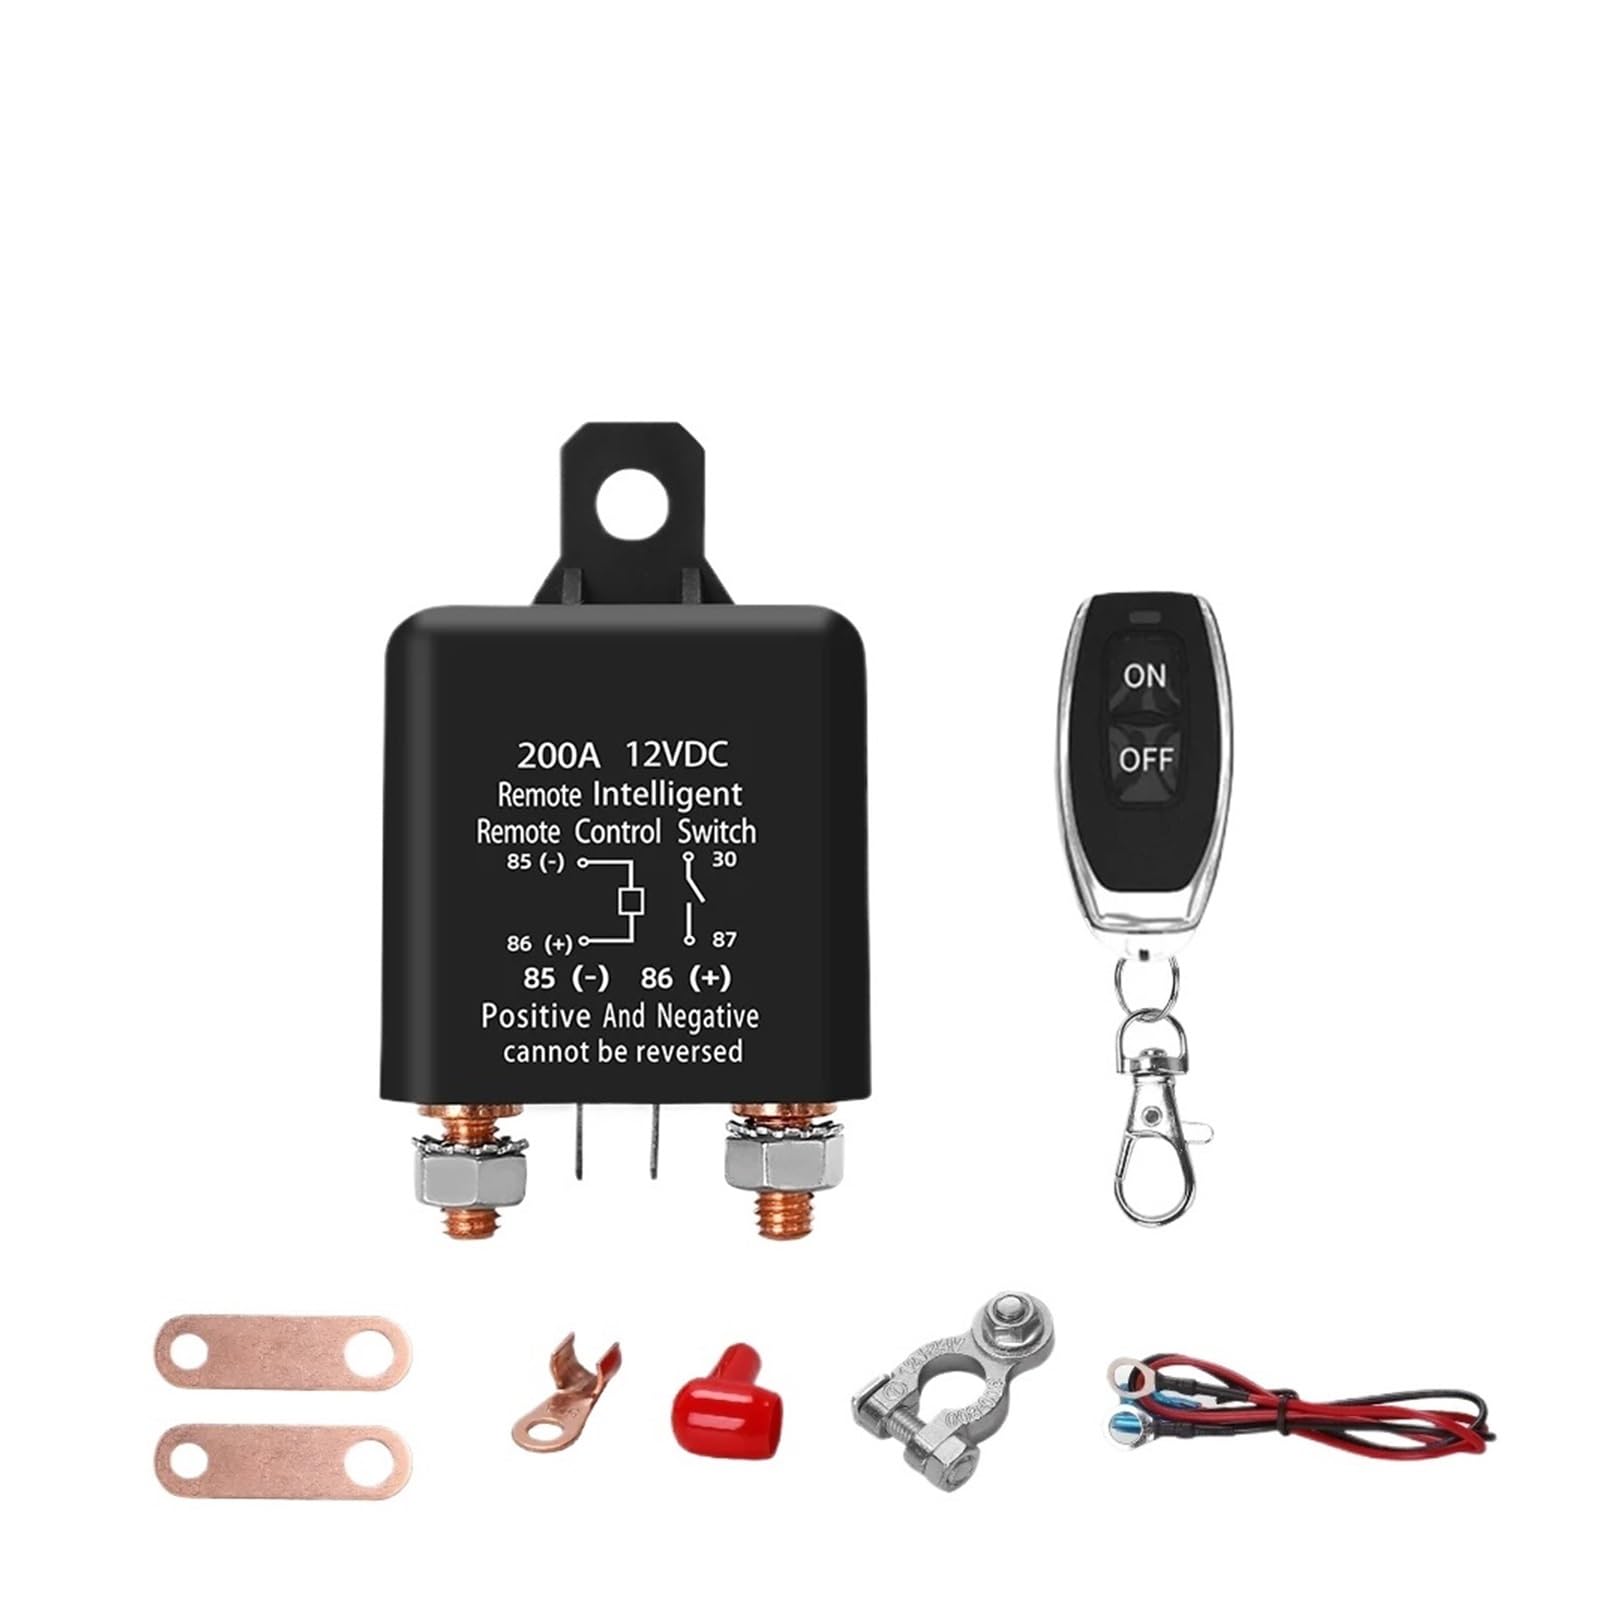 Battery Switch Relay Wireless Remote Control Disconnect Cut Off Isolator Master Switches 12V 120A 200A 500A NWPNLXEA(12V 200A 2PC KEY) von NWPNLXEA